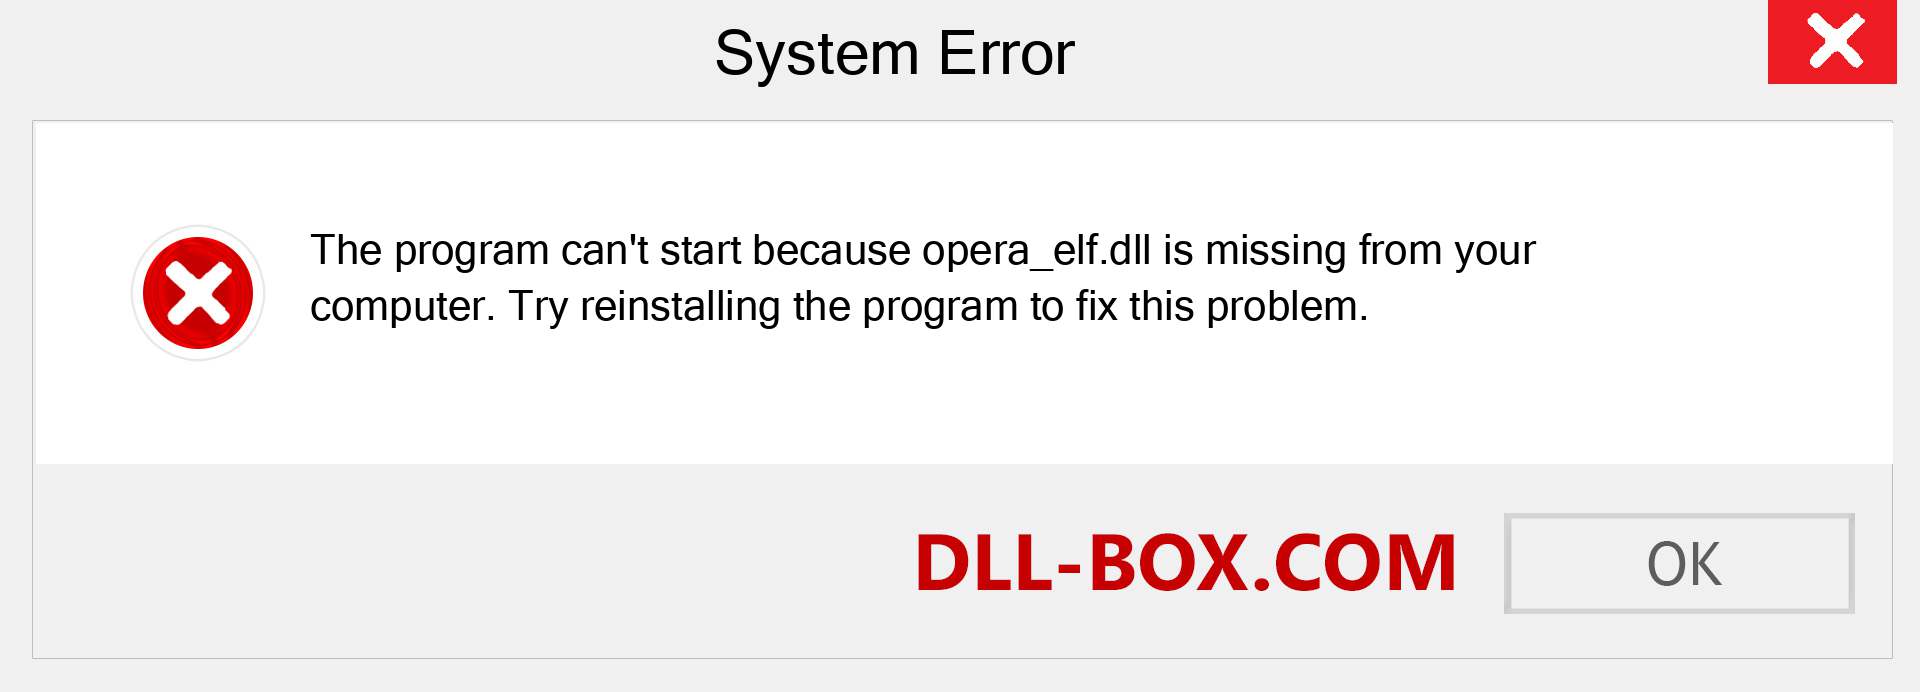  opera_elf.dll file is missing?. Download for Windows 7, 8, 10 - Fix  opera_elf dll Missing Error on Windows, photos, images